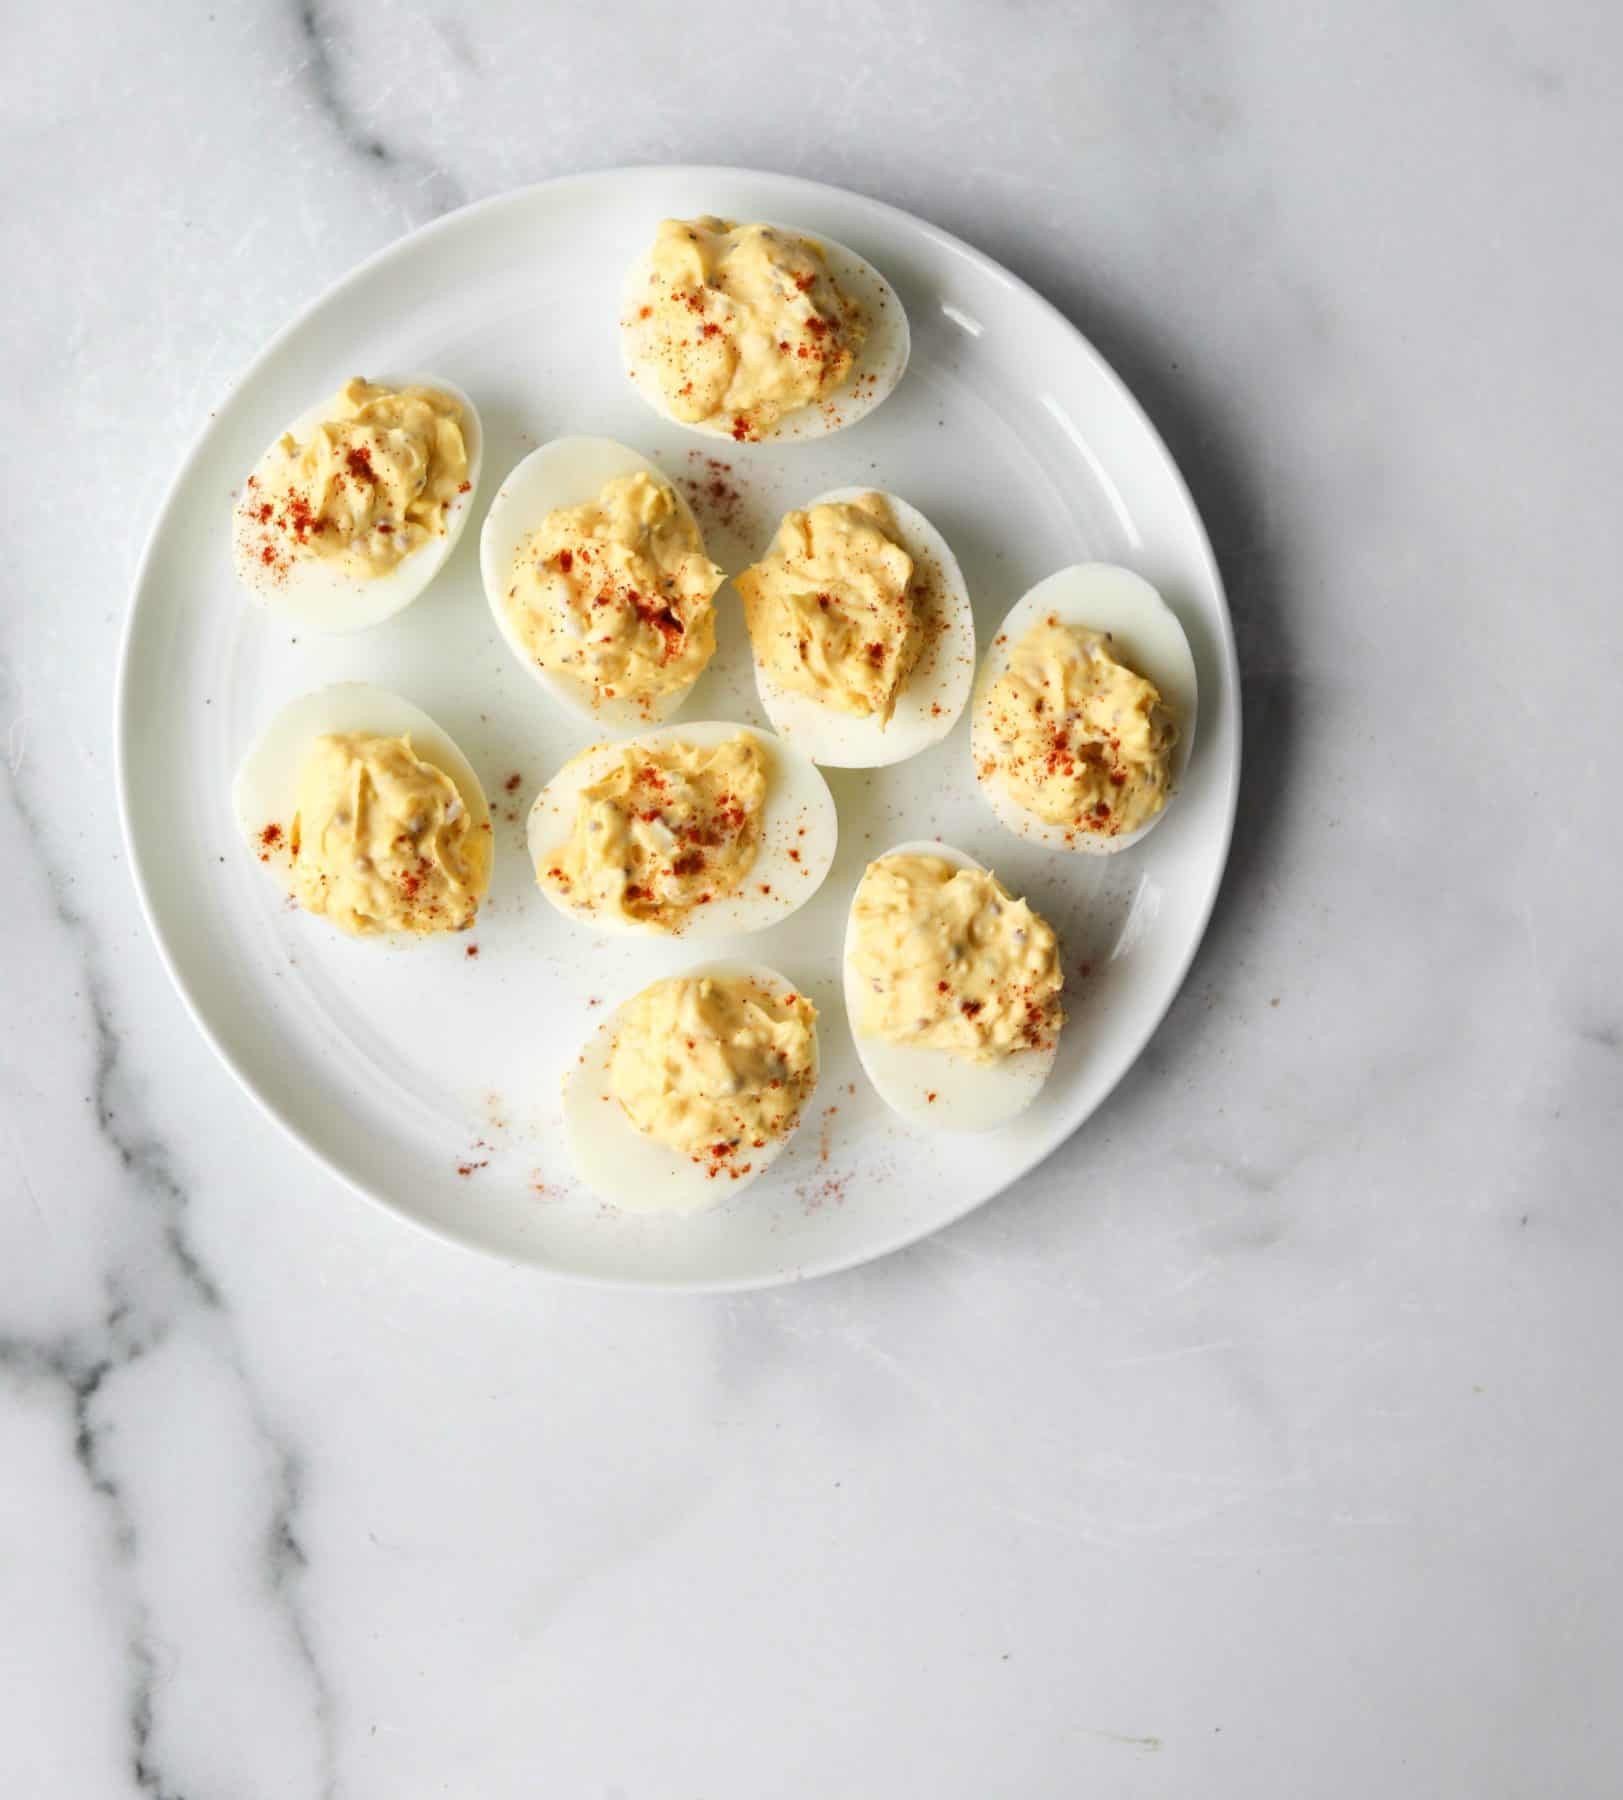 Deviled eggs on a white plate as an example of a healthy egg recipe